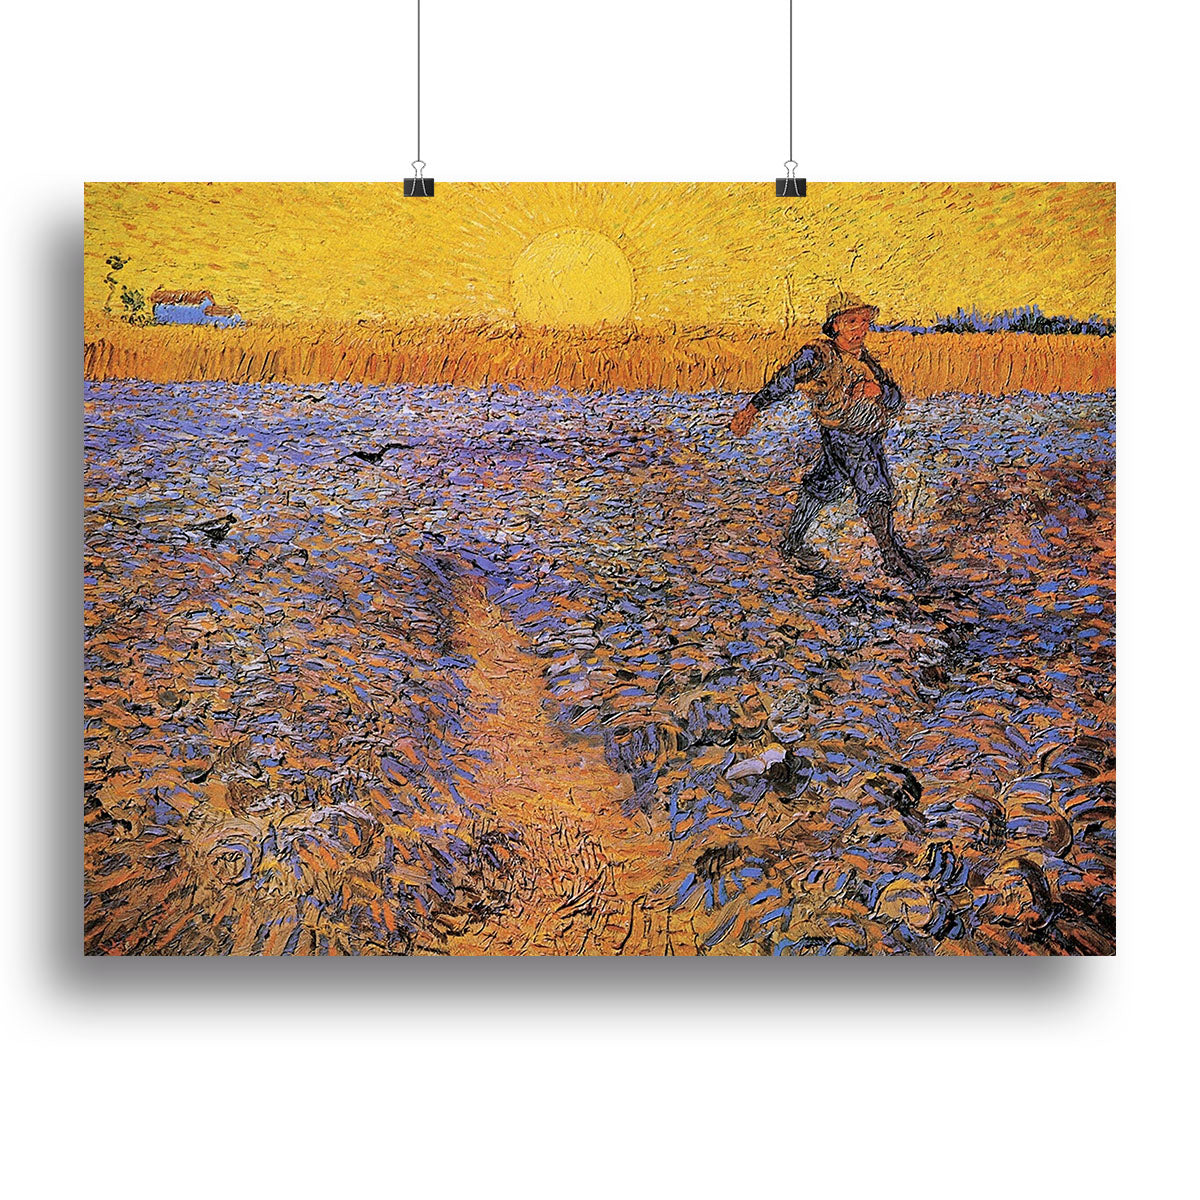 The Sower 3 by Van Gogh Canvas Print or Poster - Canvas Art Rocks - 2